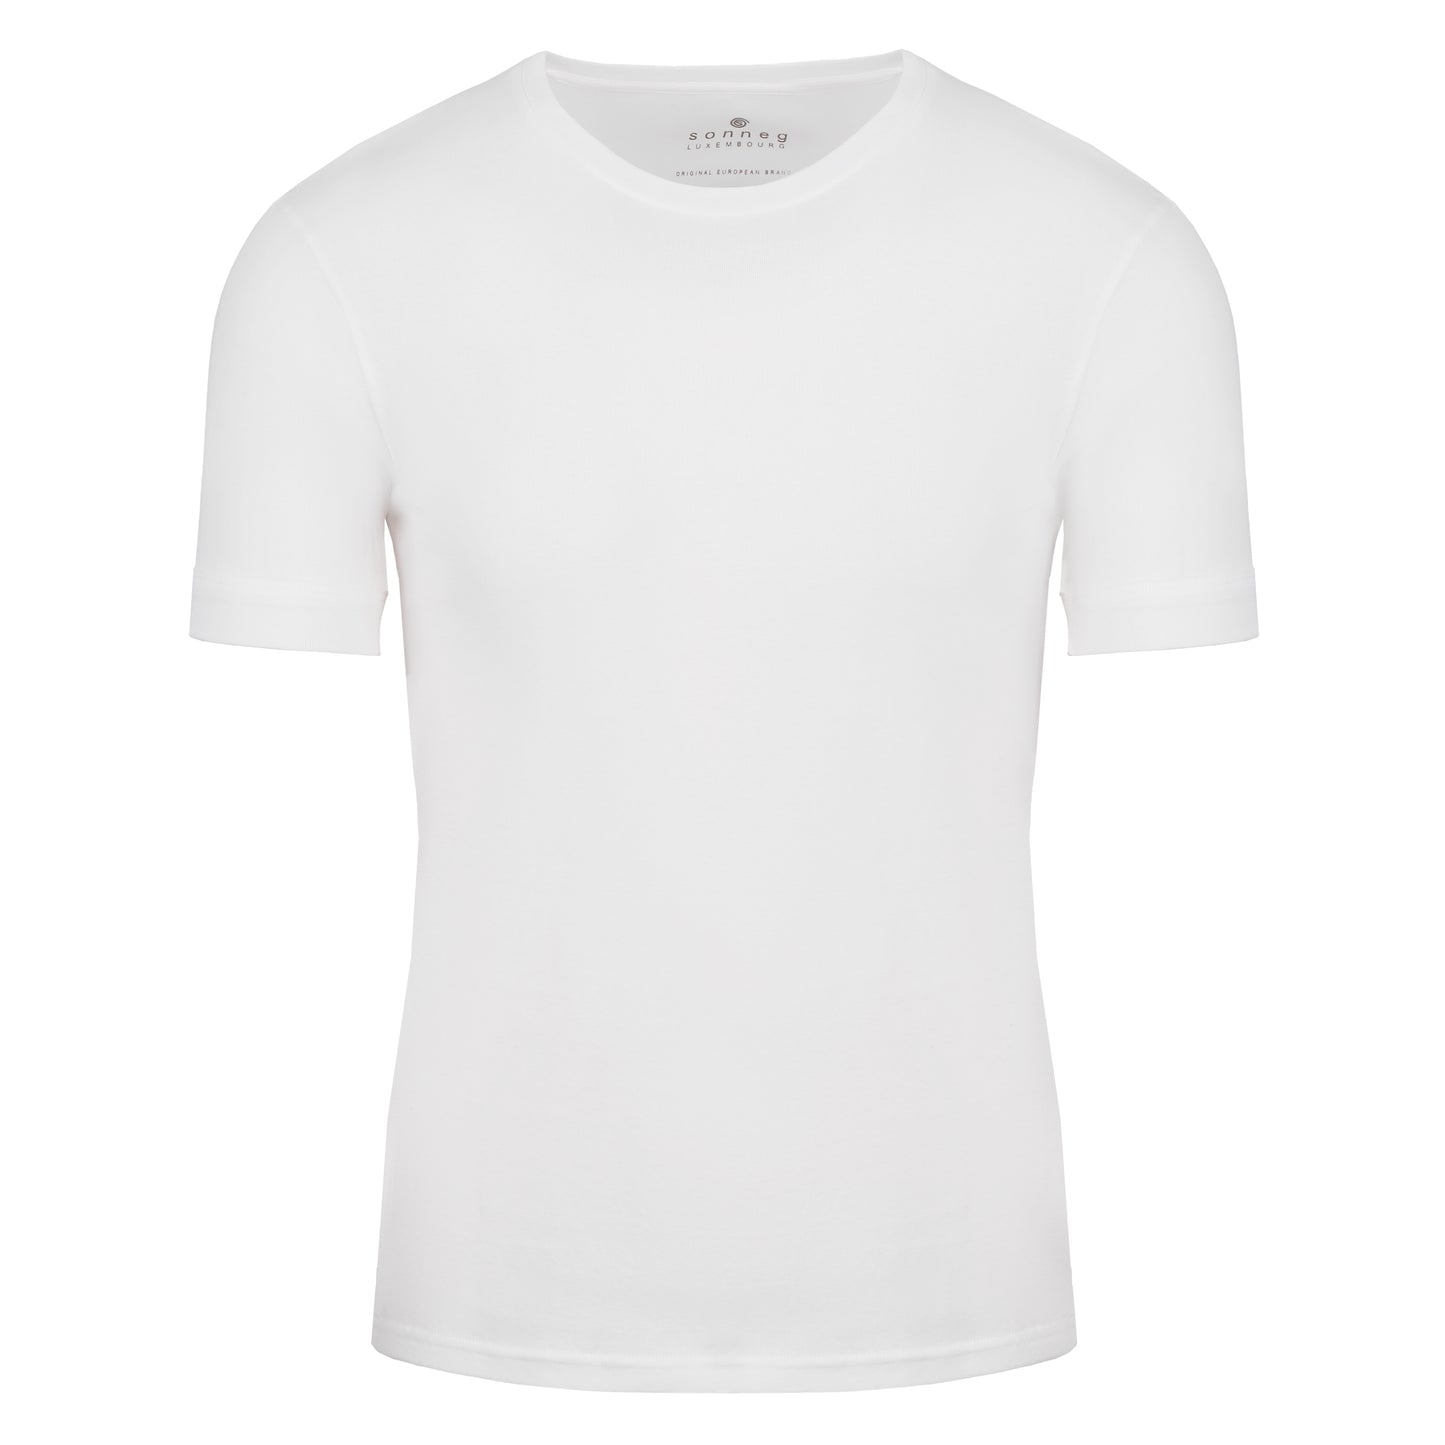 Round neck white T-shirt for men – pack of 2 or 4 tees